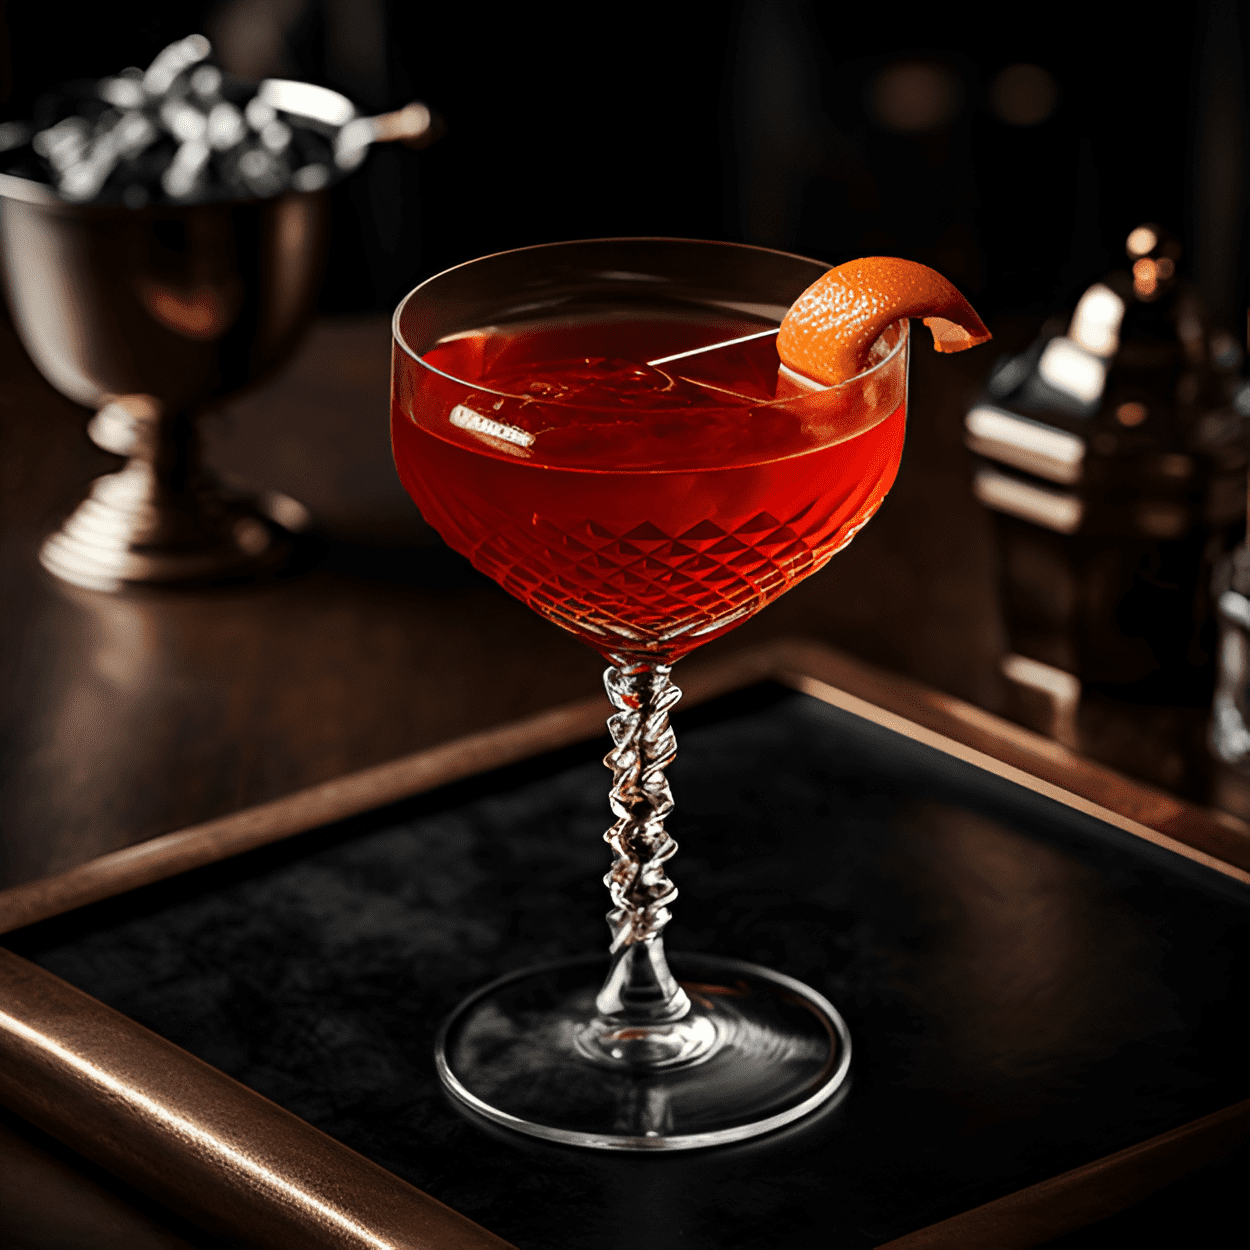 Ward Eight Cocktail Recipe - The Ward Eight has a balanced taste profile, featuring a mix of sweet, sour, and fruity flavors. The whiskey provides a strong, warming base, while the lemon and orange juices add a refreshing citrus tang. The grenadine imparts a subtle sweetness and a beautiful color to the drink.